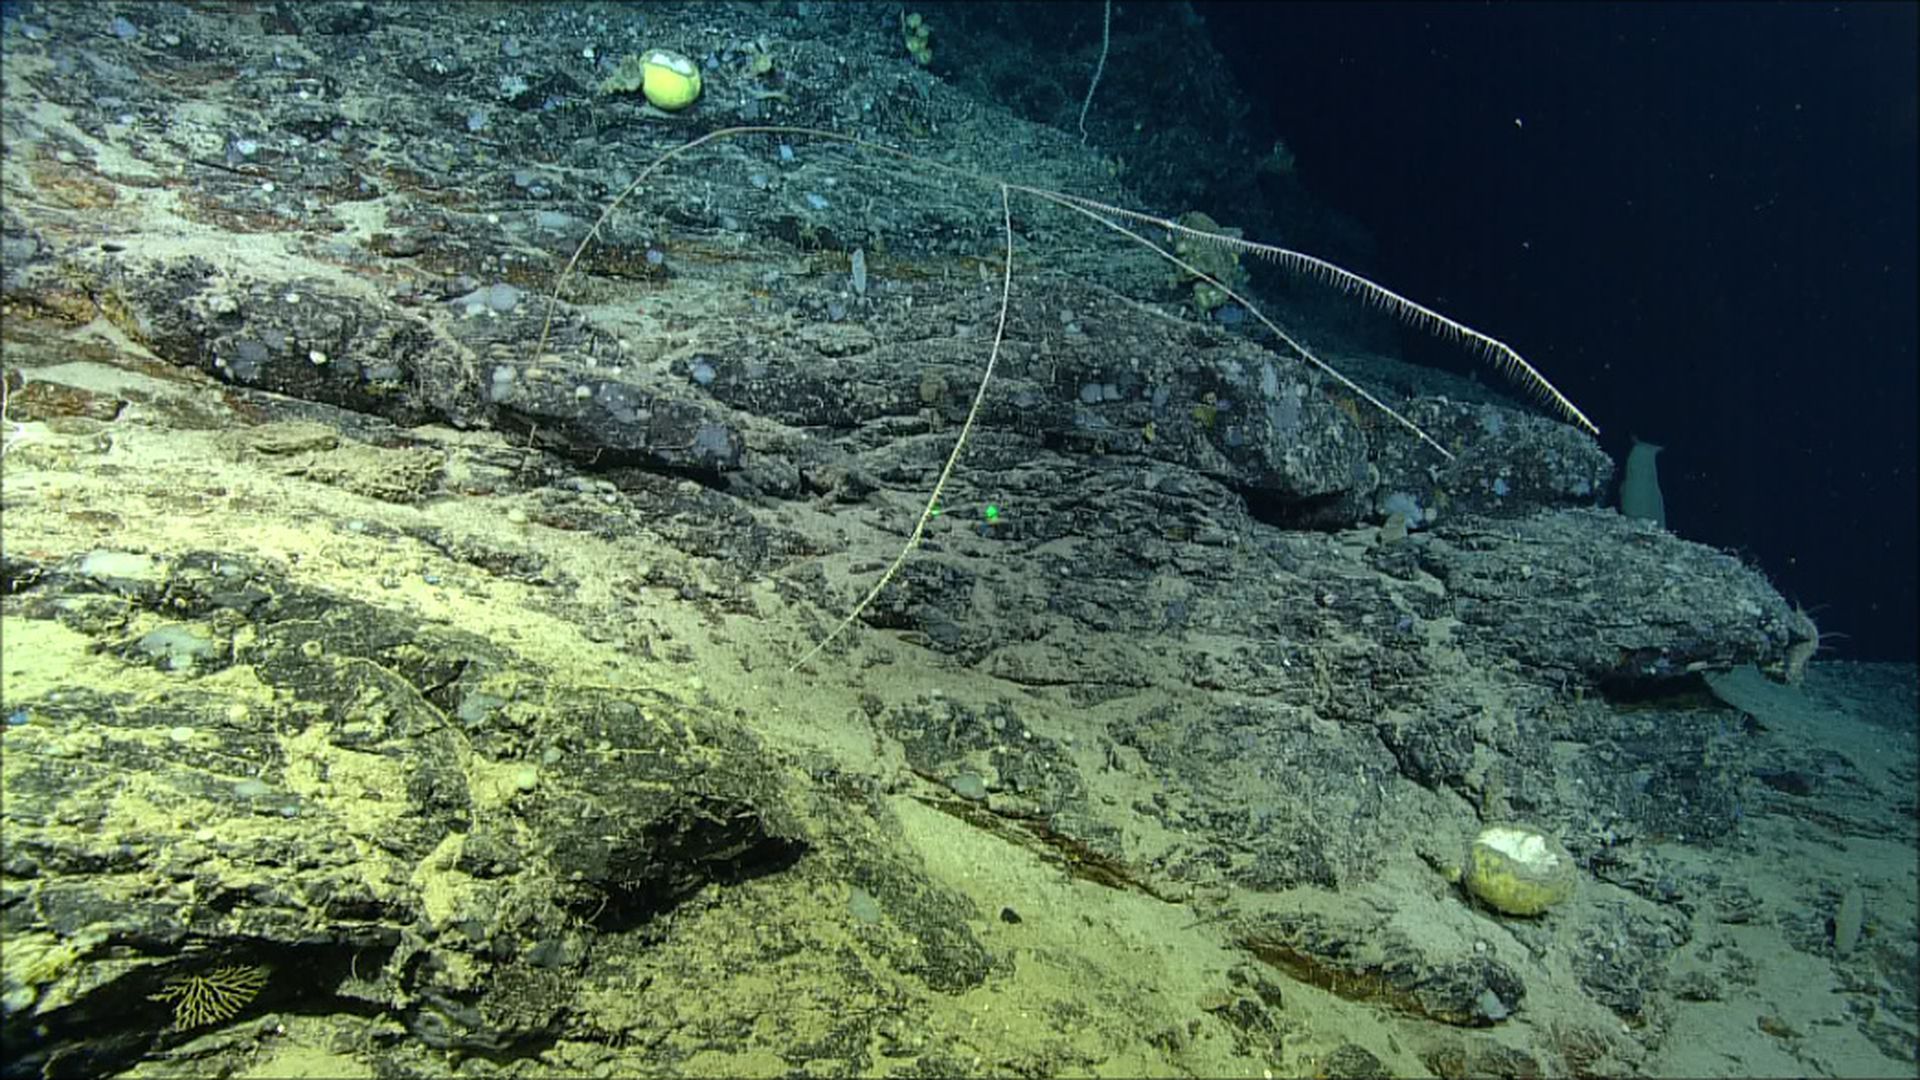 New species of meat-eating sponge found off the coast of Canada - The Verge